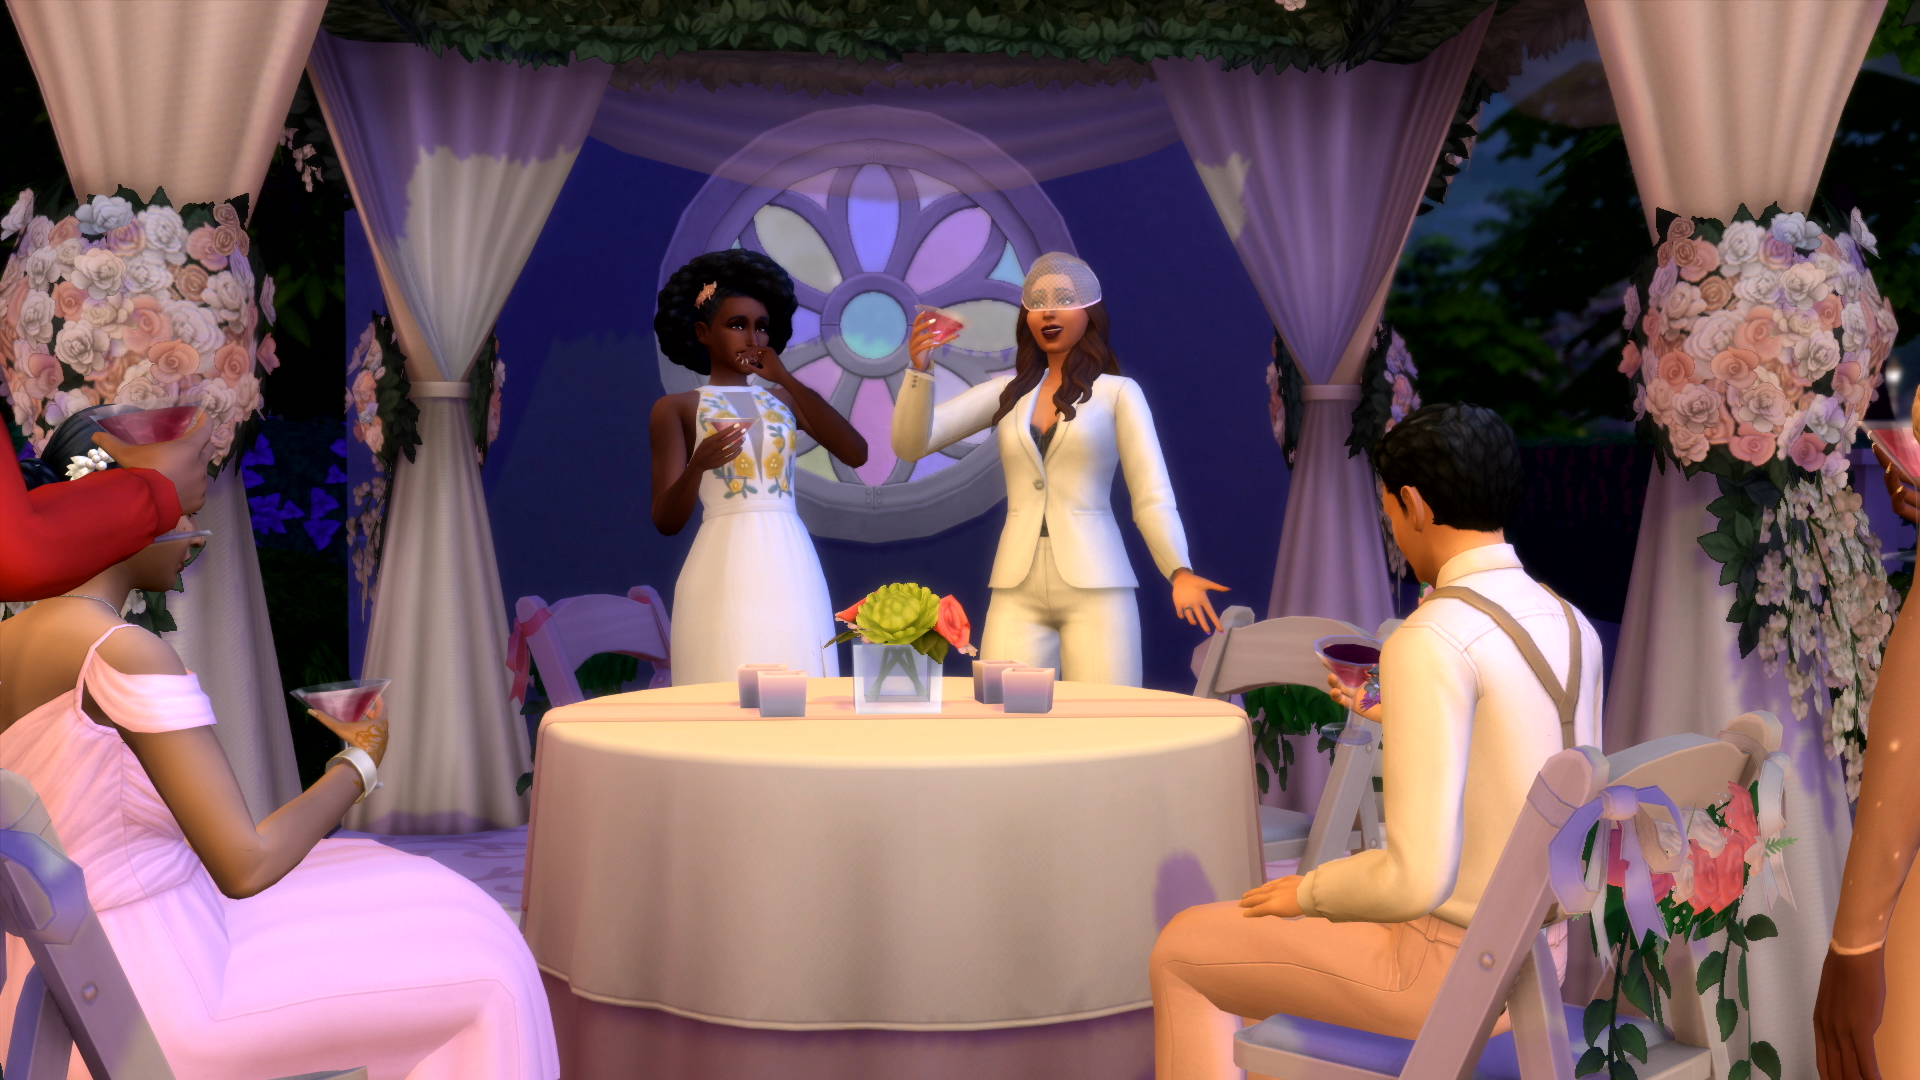 The Sims 4 expansion My Wedding Stories won't launch in Russia due to the country anti-LGBTQ law